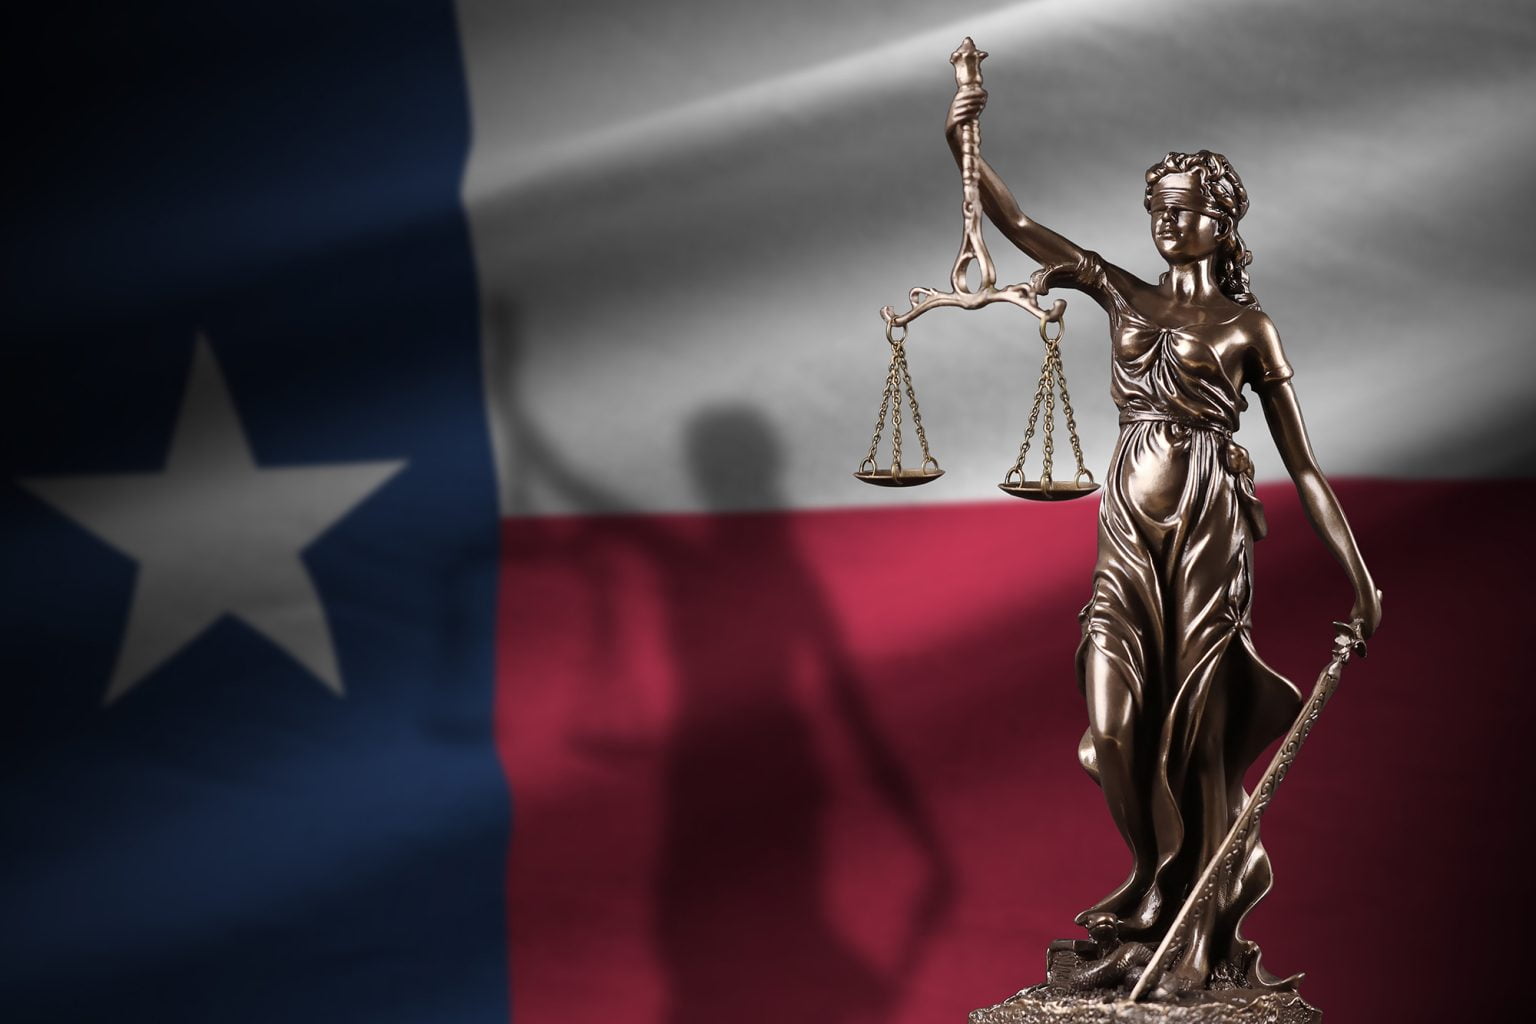 Texas US state flag with statue of lady justice